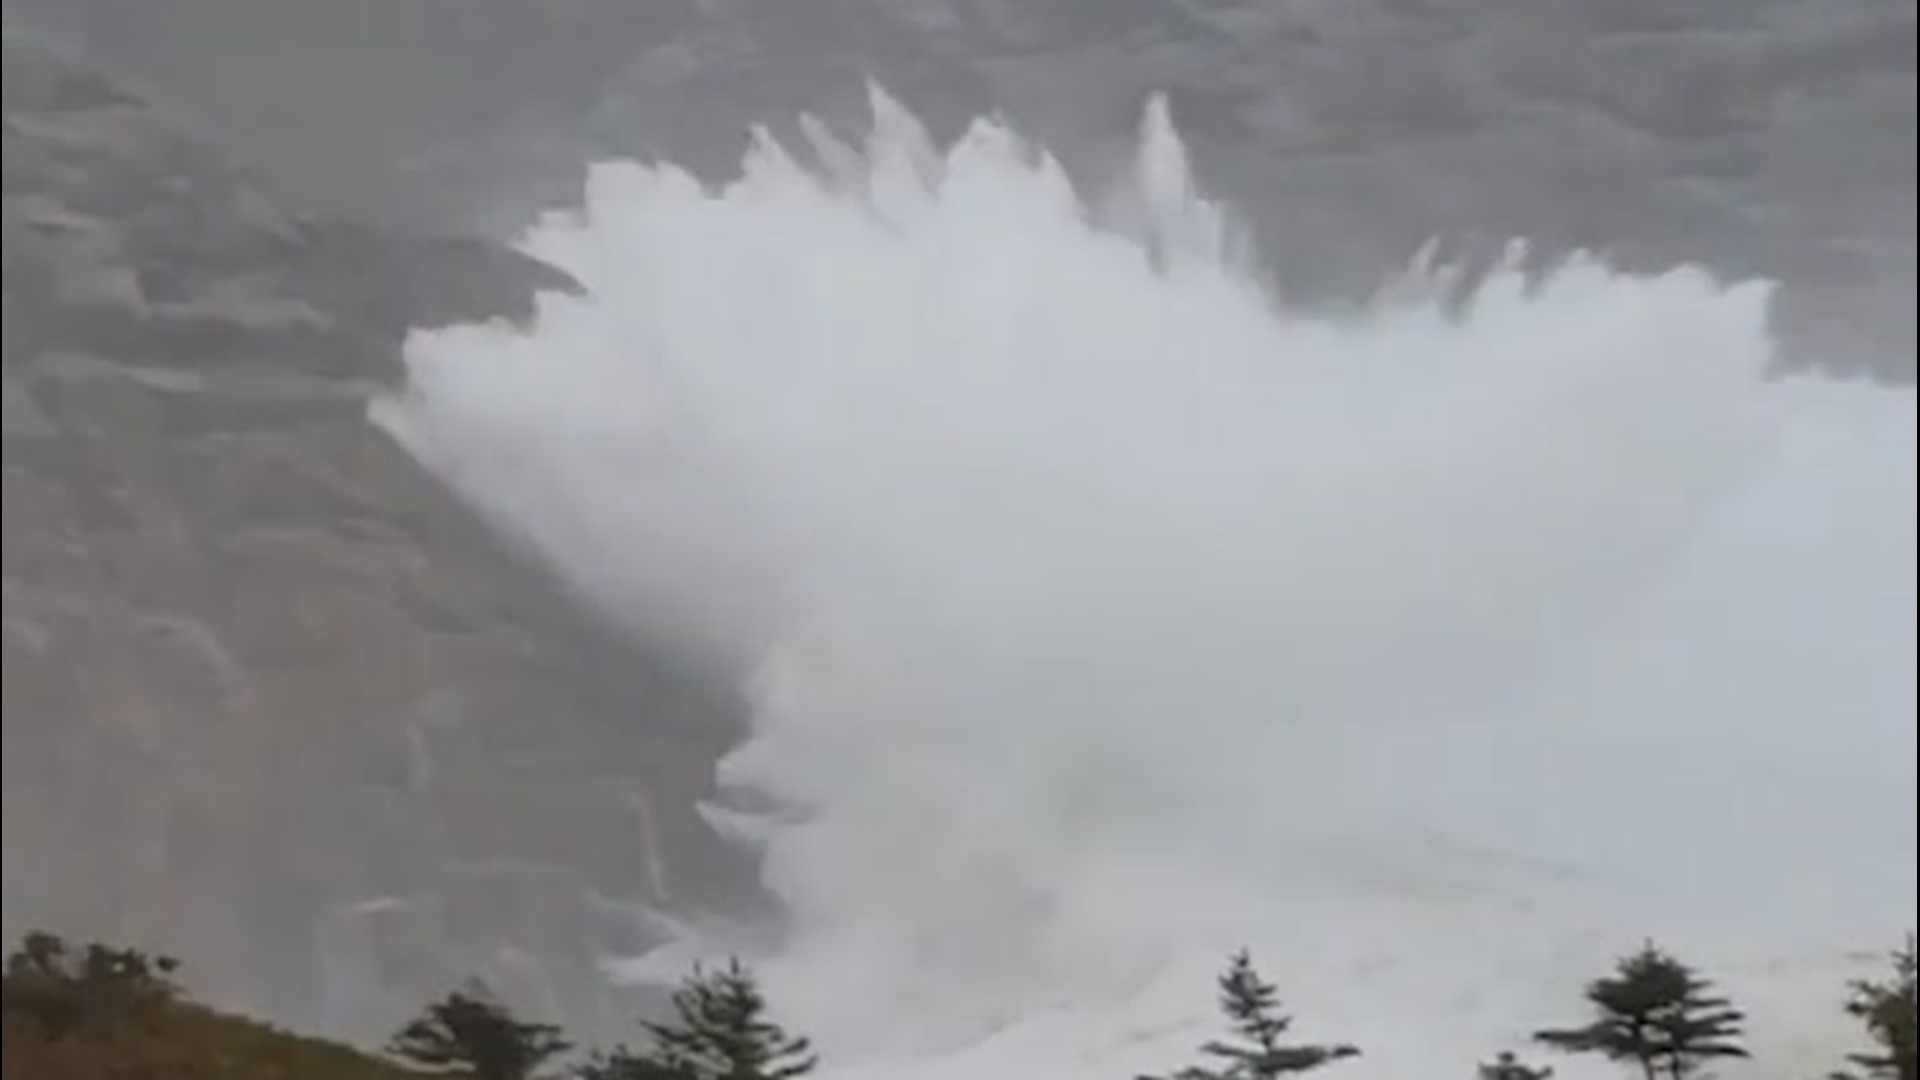 Huge waves churned by Teddy crashed into the rocky shoreline in Ketch Harbour, Nova Scotia, on Sept. 22. Water was seen launching high into the air.